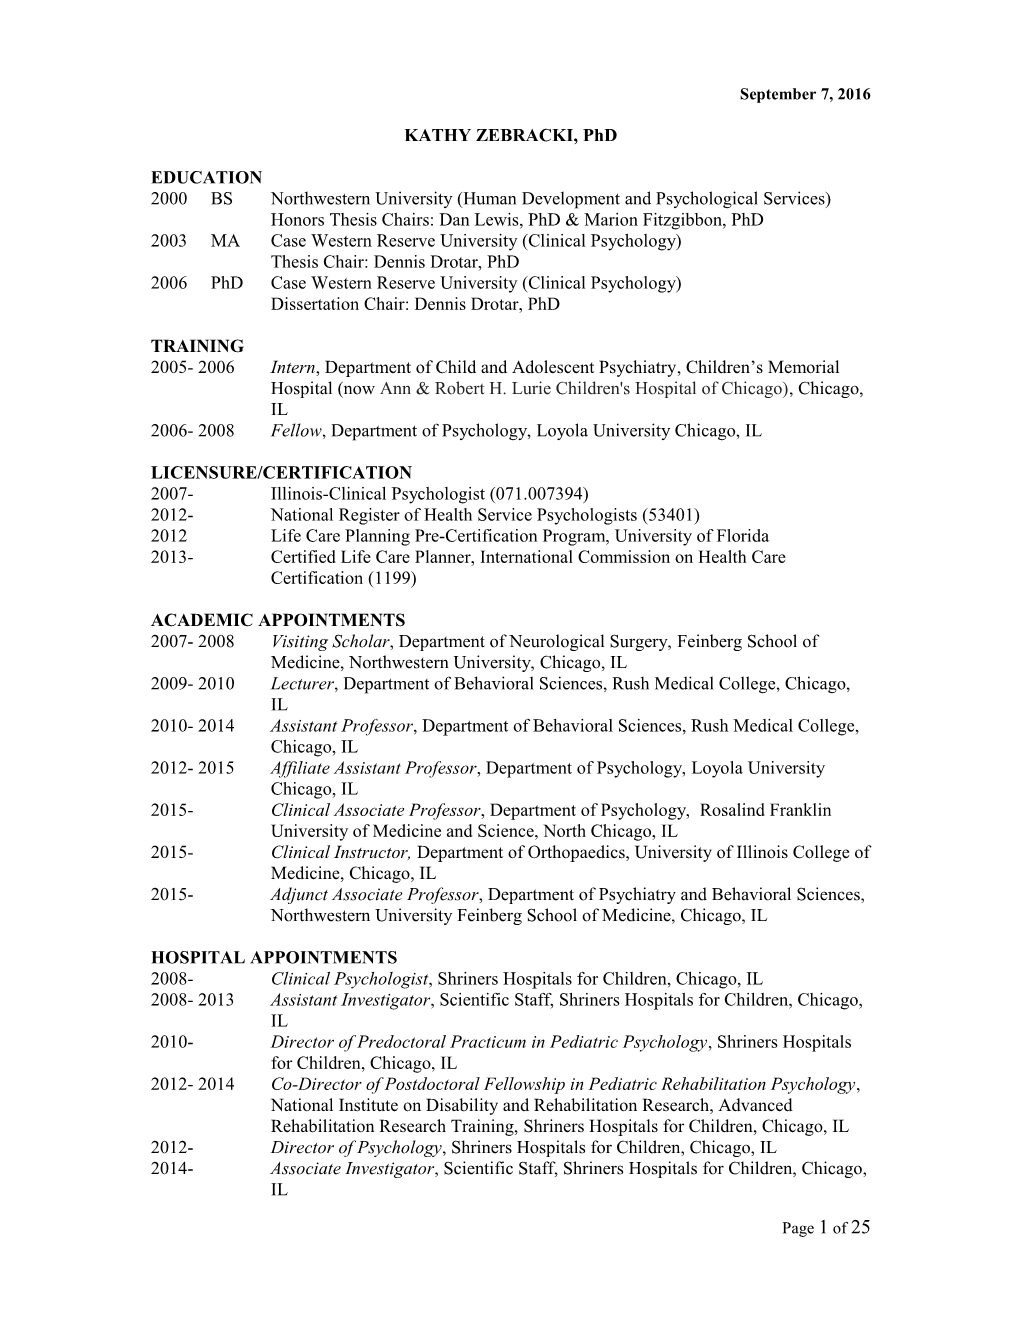 Standardized Curriculum Vitae for Faculty Actions